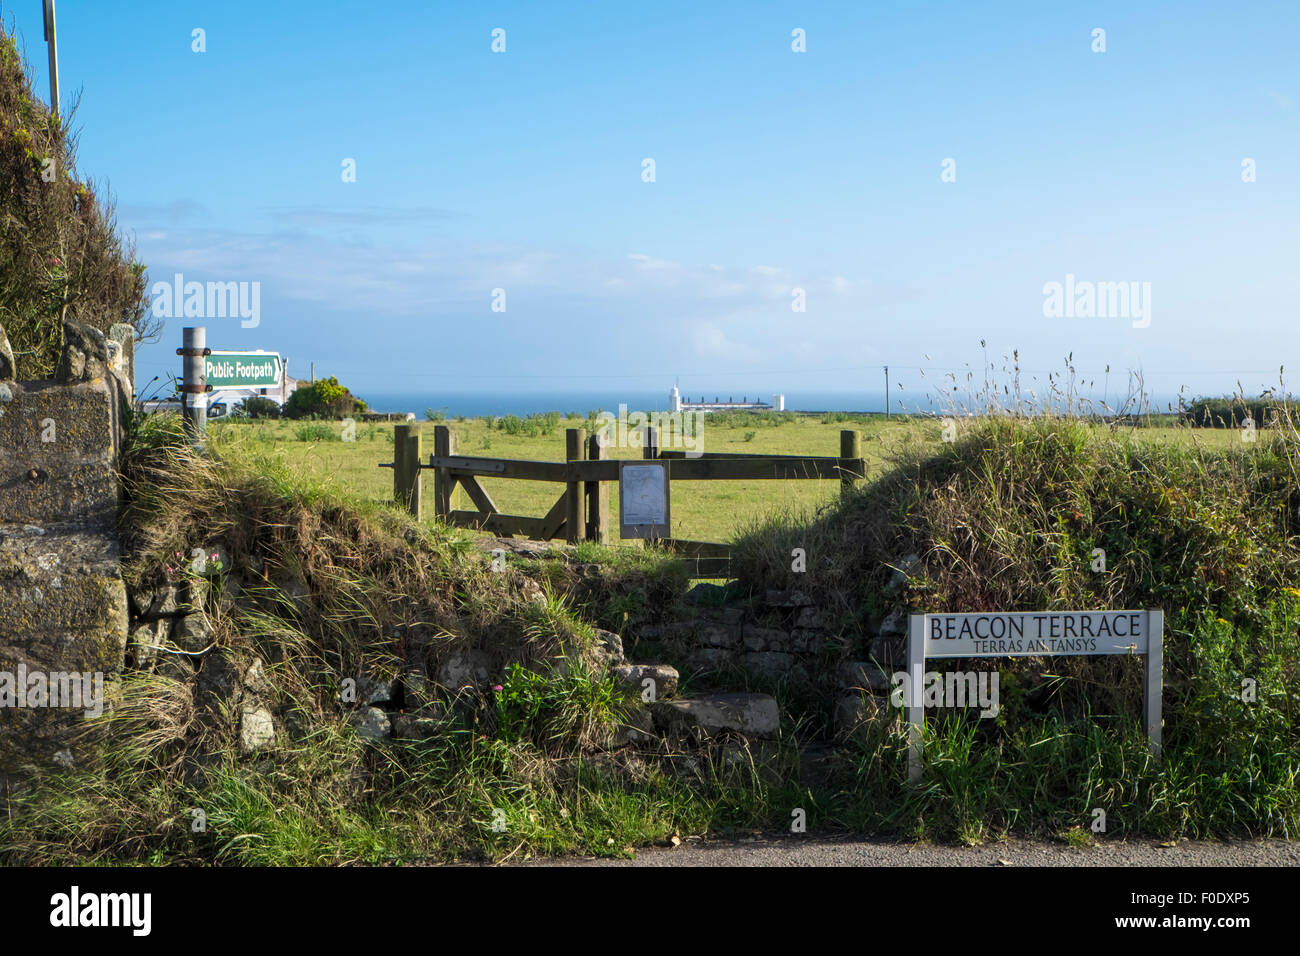 Lizard Village Cornwall England UK  Beacon Terrace, path to the most southerly point and lighthouse. Stock Photo